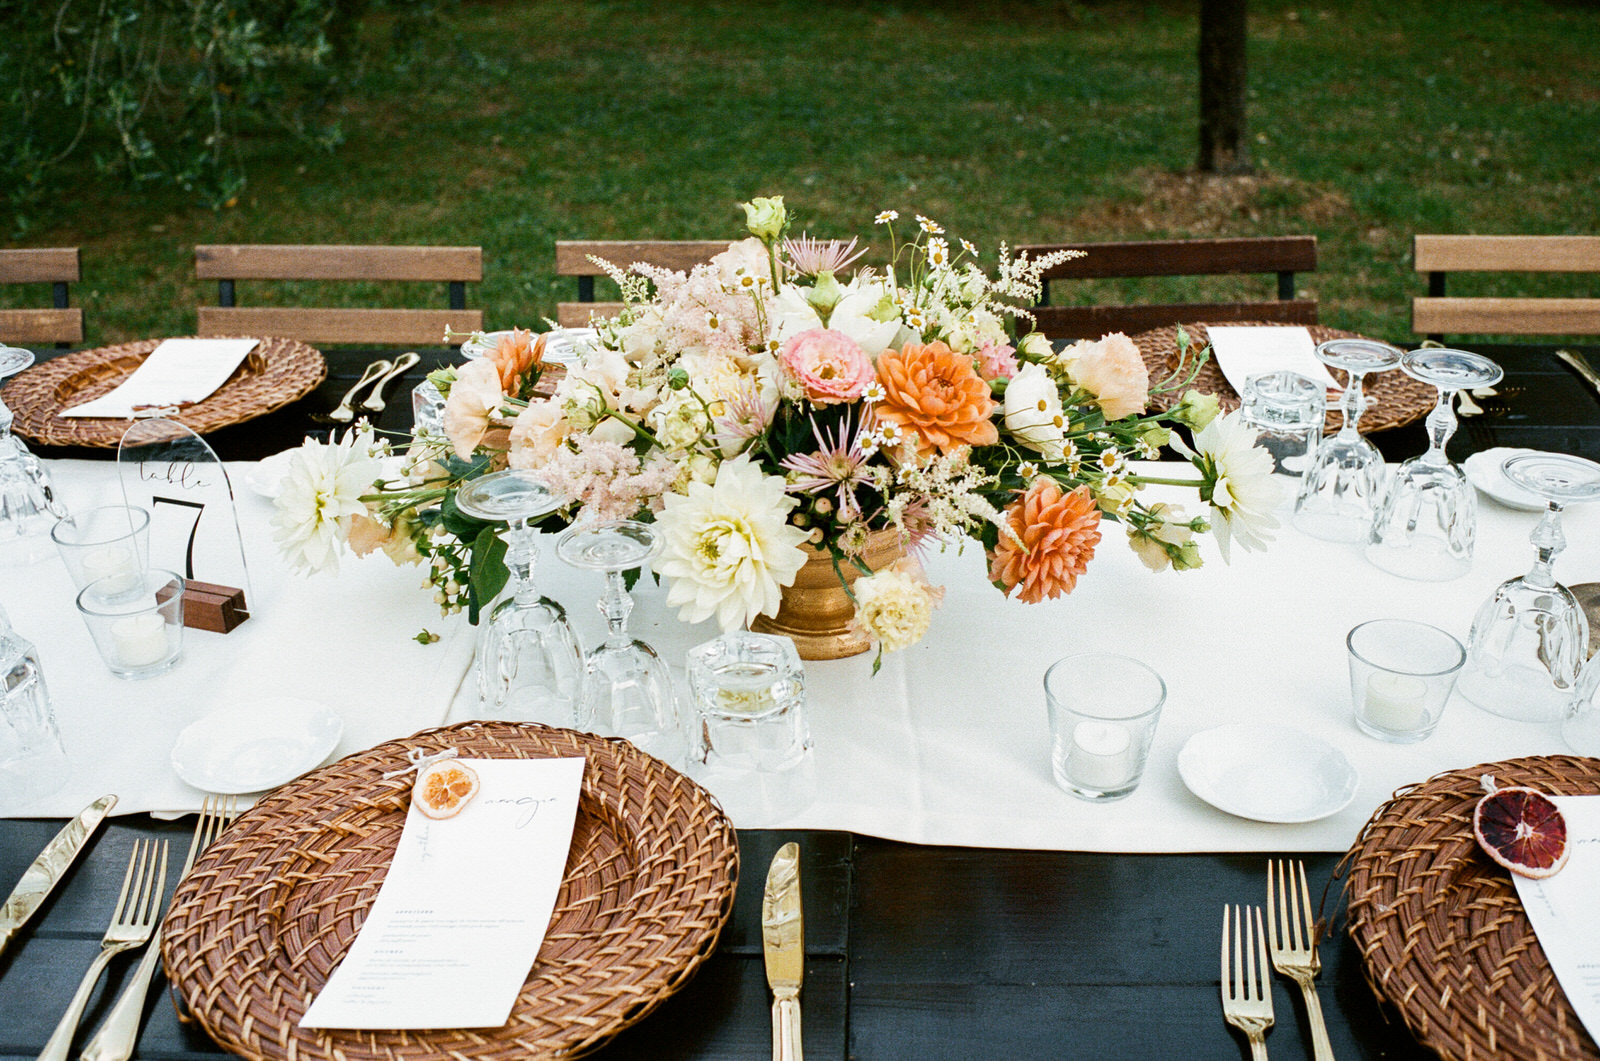 A Sweet Summer Wedding in Tuscany: Colorful Blooms, Music, and Guests from Around the World